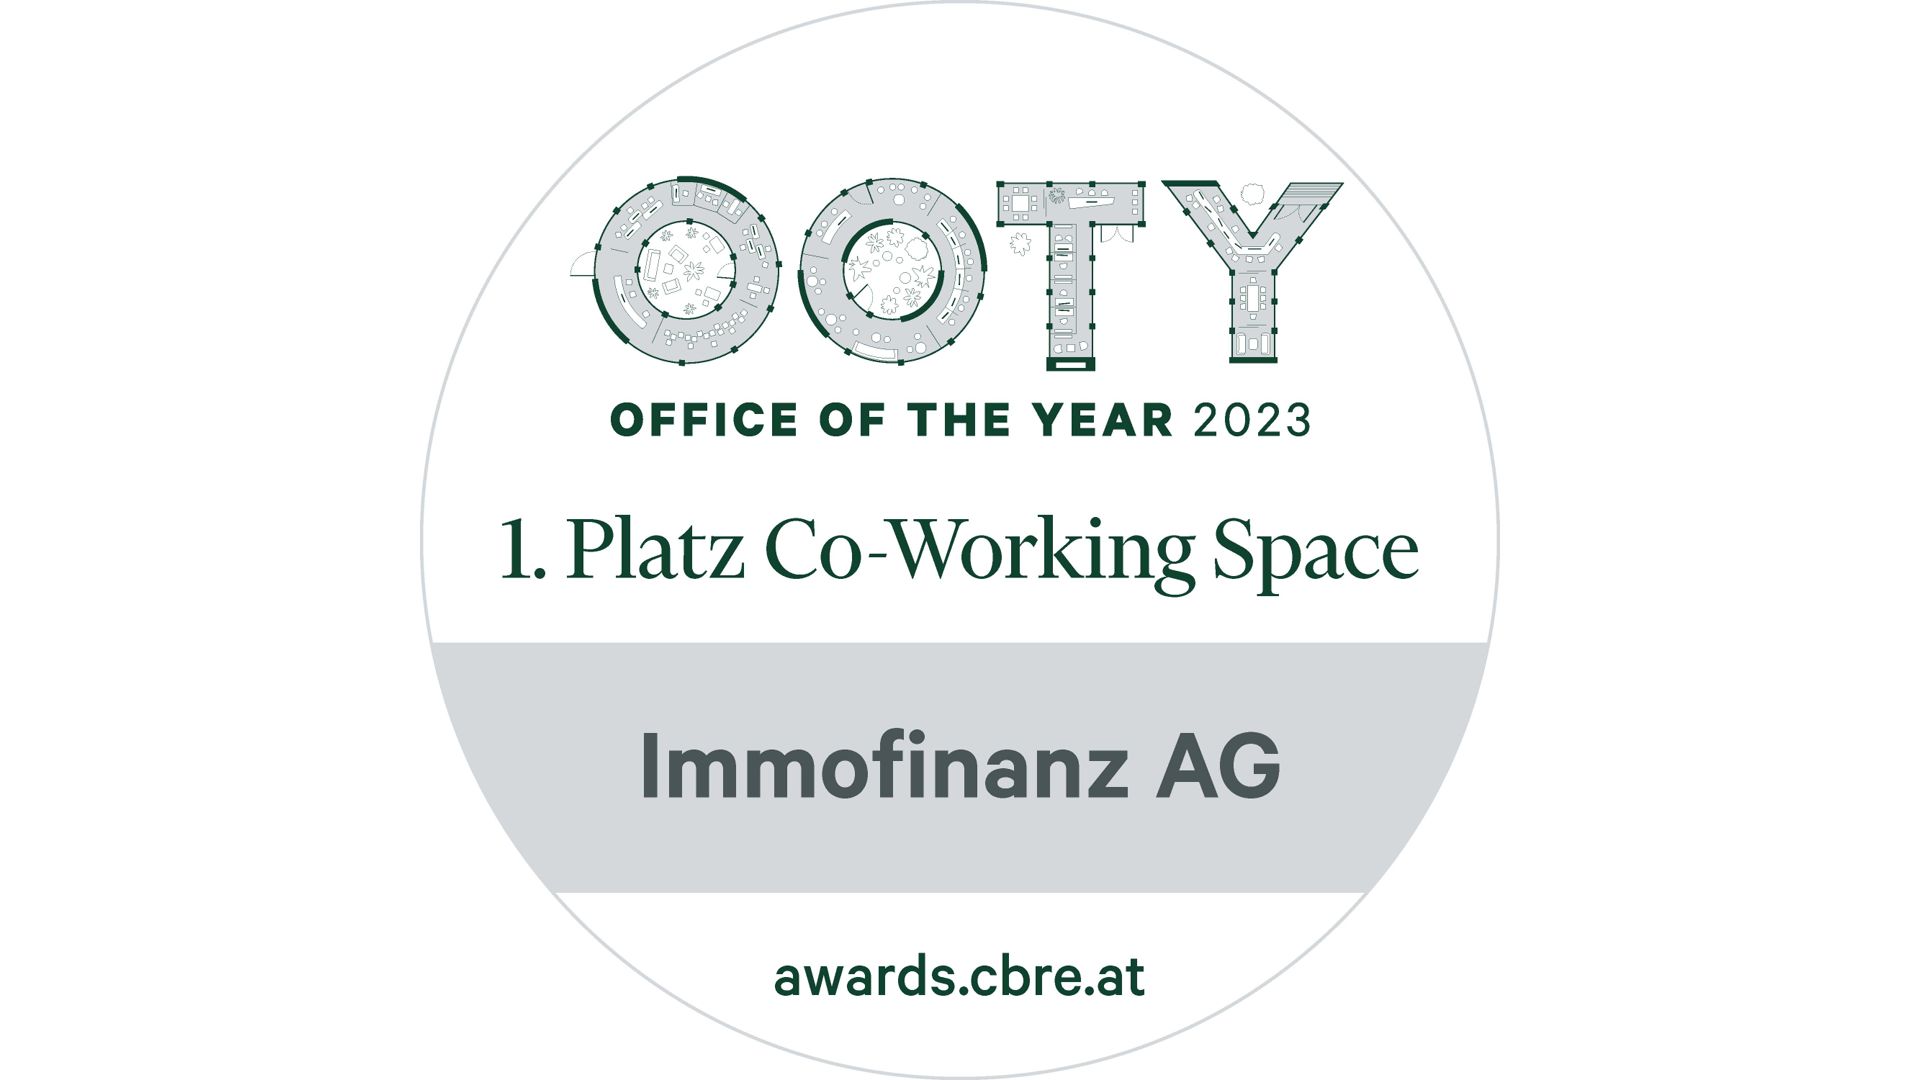 Office of the Year Award_Co-Working Space_1. Platz_IMMOFINANZ